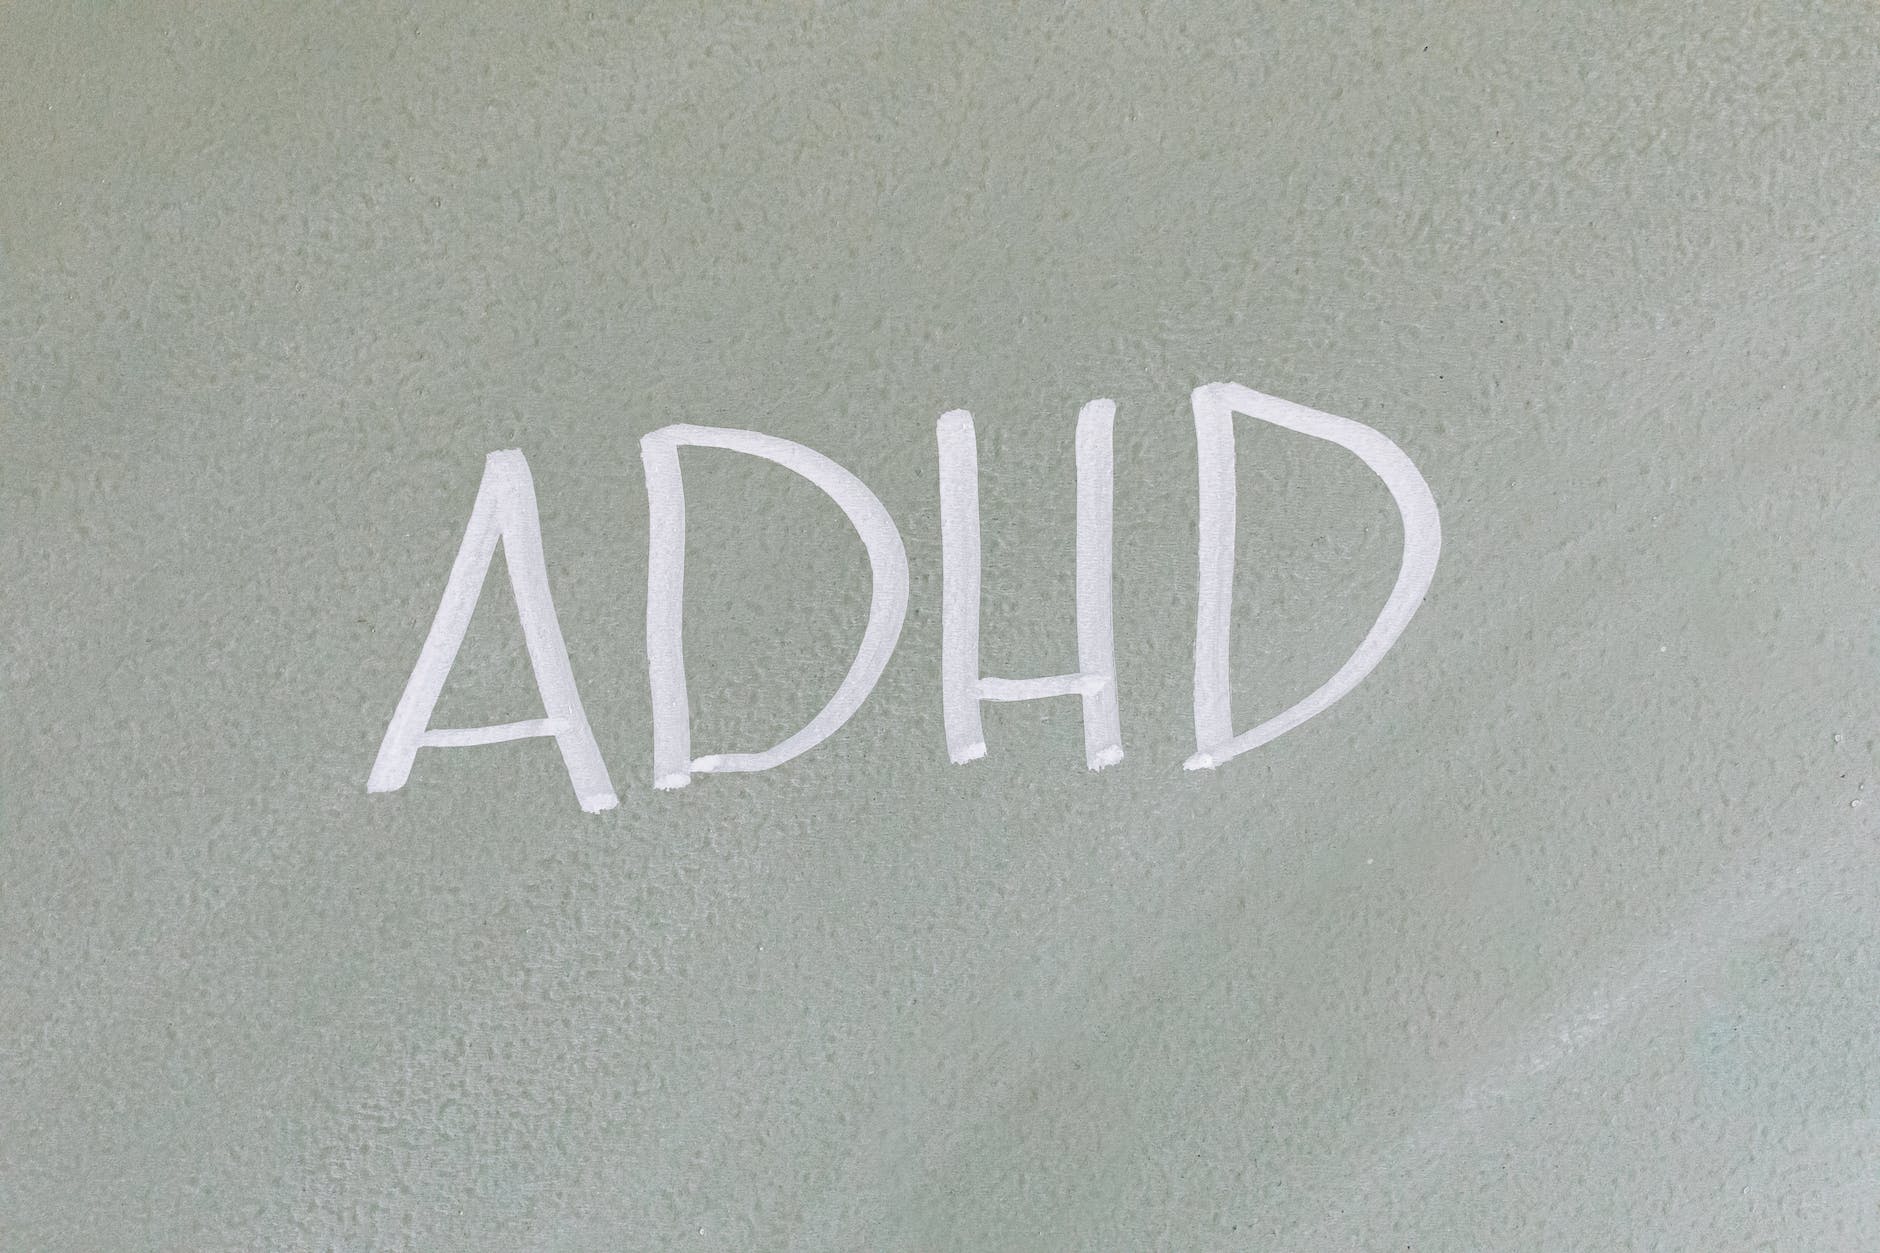 ADHD in adults isn’t real, is it?